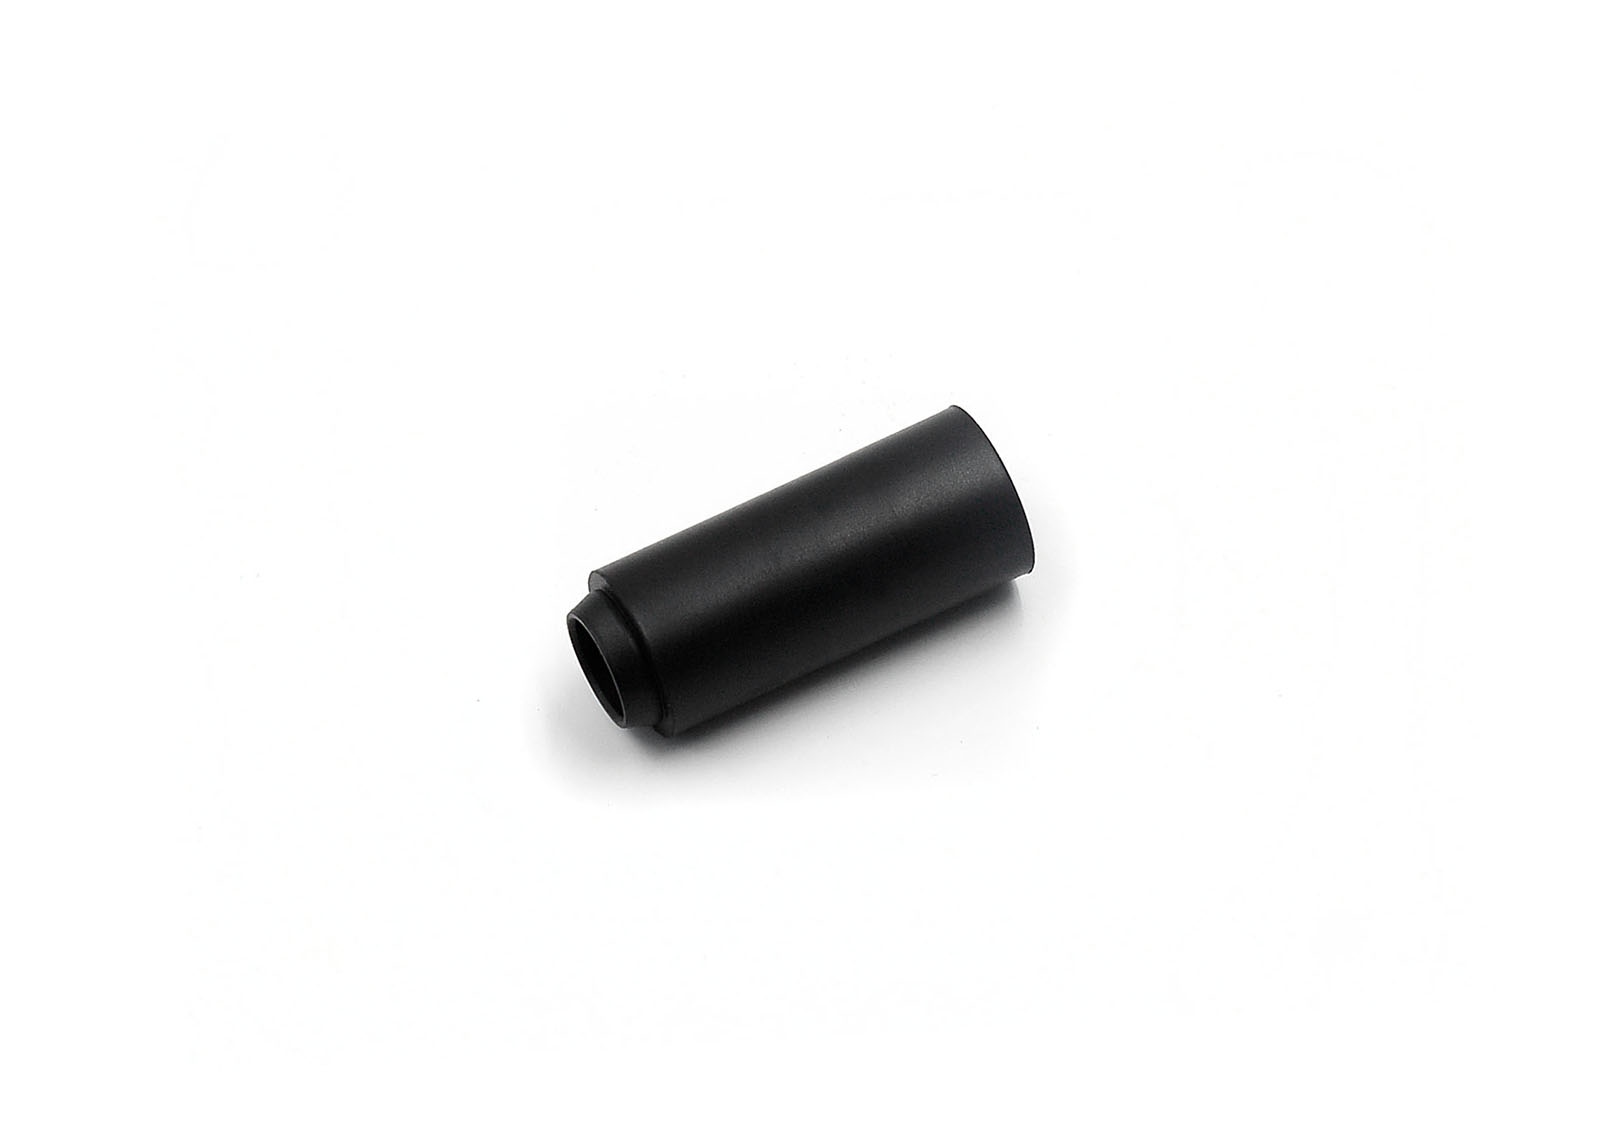 Professional 2 Ring, Hop Up Bucking for Modify Hybrid Inner Barrel - Modify Airsoft parts